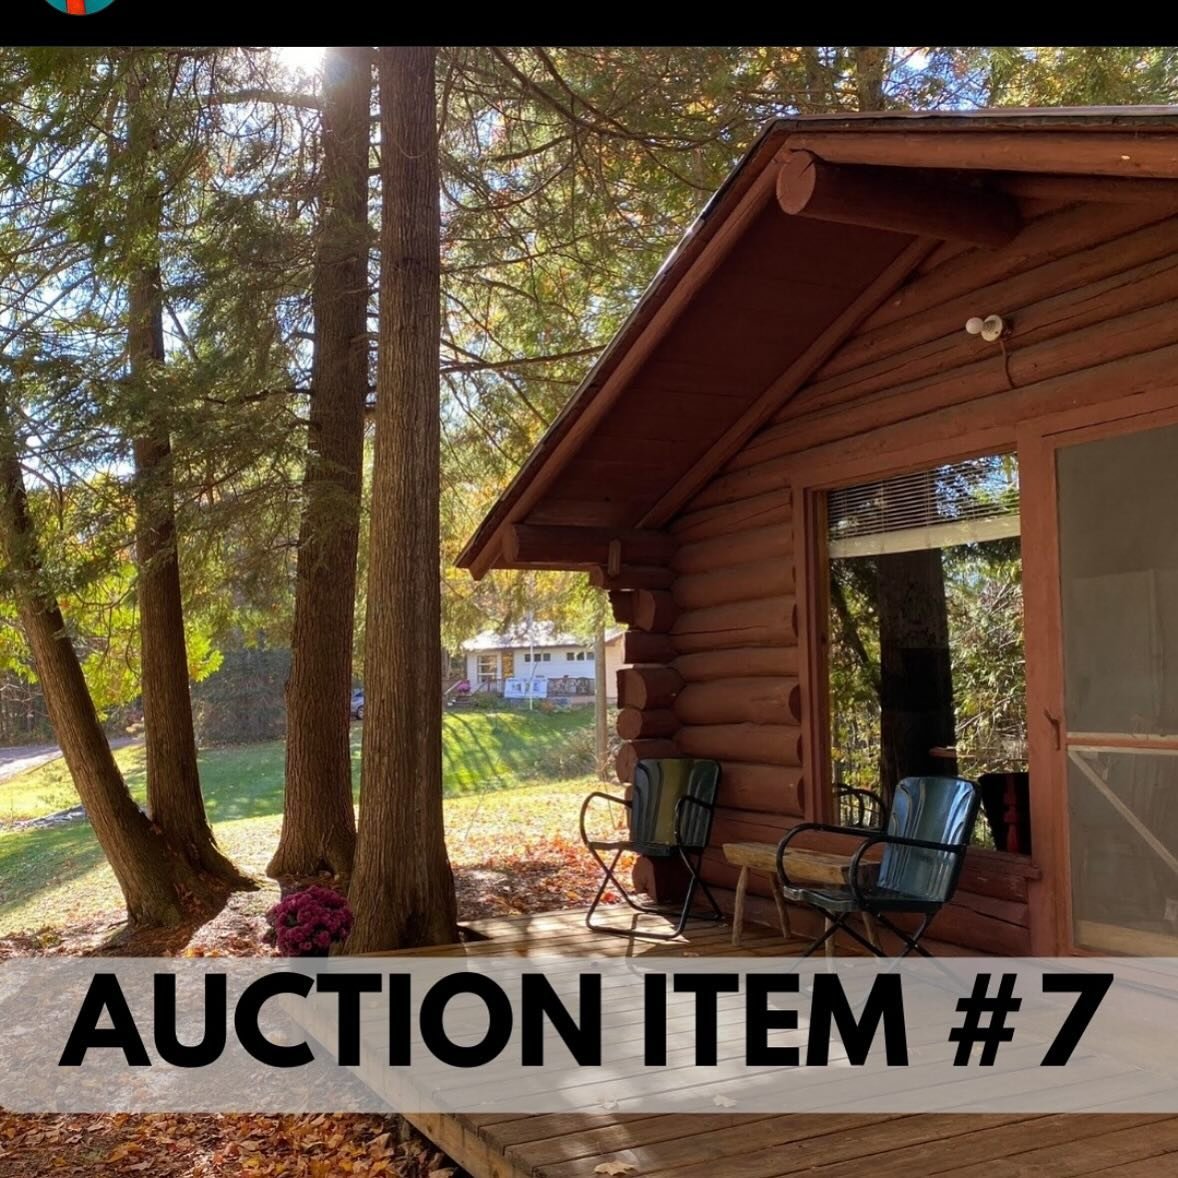 Lucky #7! To bid on a stay at Manninen&rsquo;s Cabins (and help support the Copper Country Community Arts Center), visit the online auction website at www.charityauction.bid/cccac. Bidding starts May 22! Items can be previewed starting May 15. #suppo